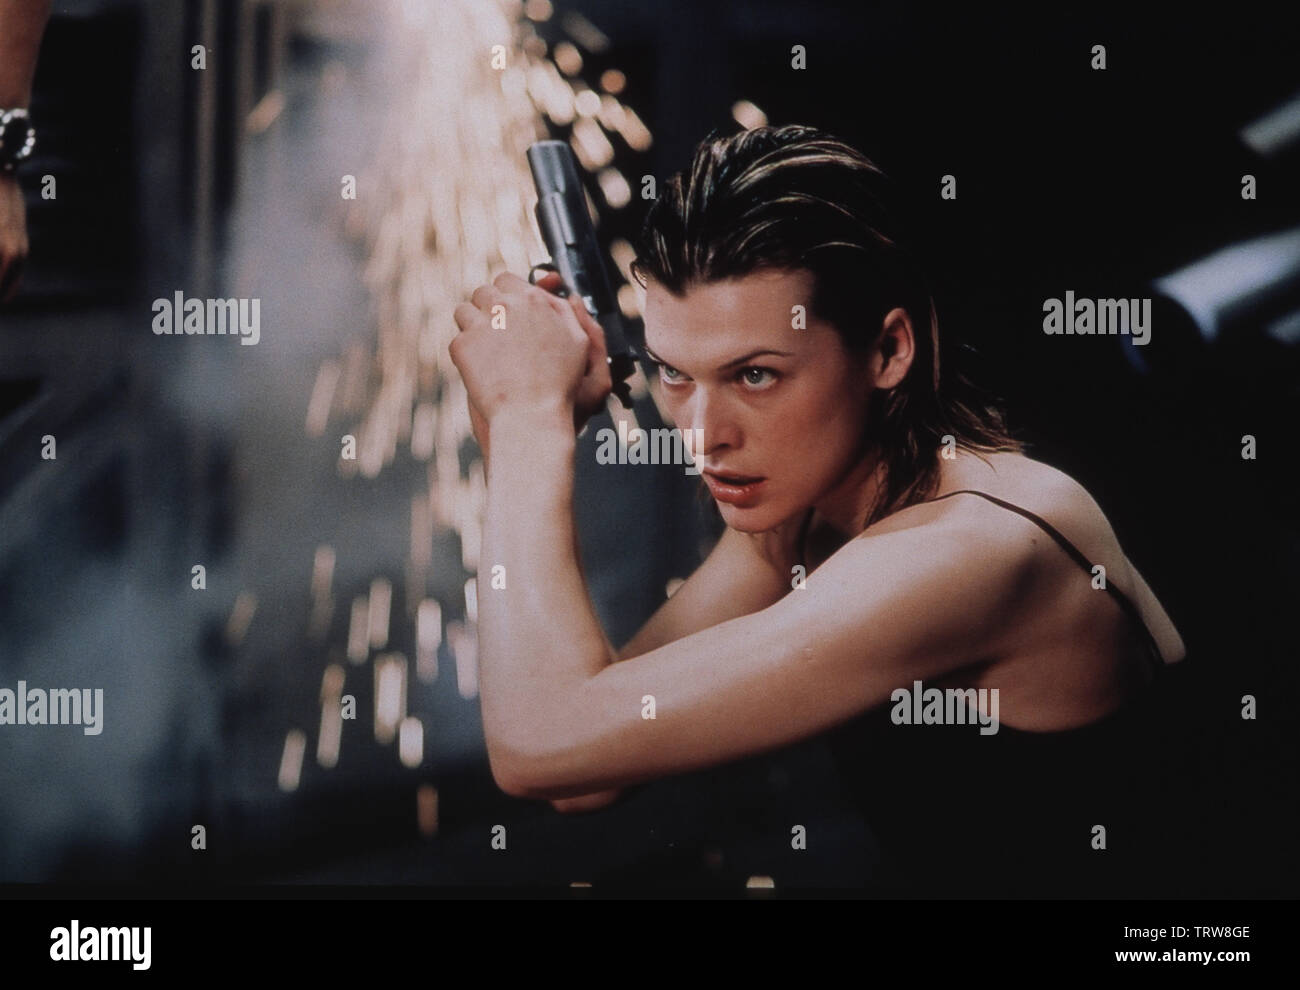 MILLA JOVOVICH in RESIDENT EVIL (2002). Copyright: Editorial use only. No merchandising or book covers. This is a publicly distributed handout. Access rights only, no license of copyright provided. Only to be reproduced in conjunction with promotion of this film. Credit: CONSTANTIN FILM / KONOW, ROLF / Album Stock Photo